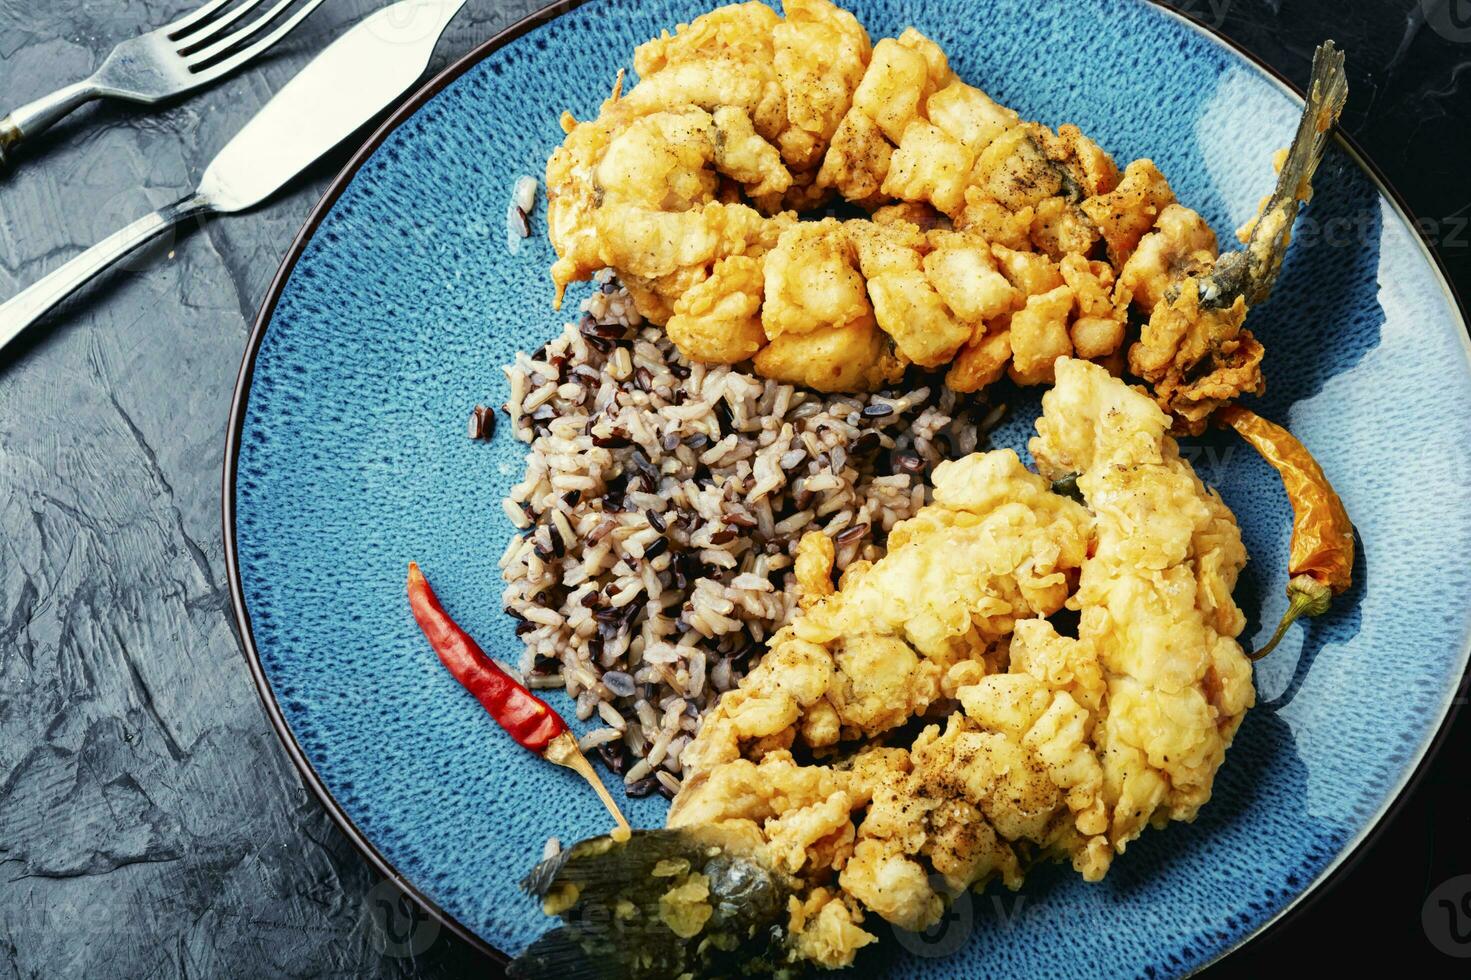 Breaded fish and rice on the plate. photo